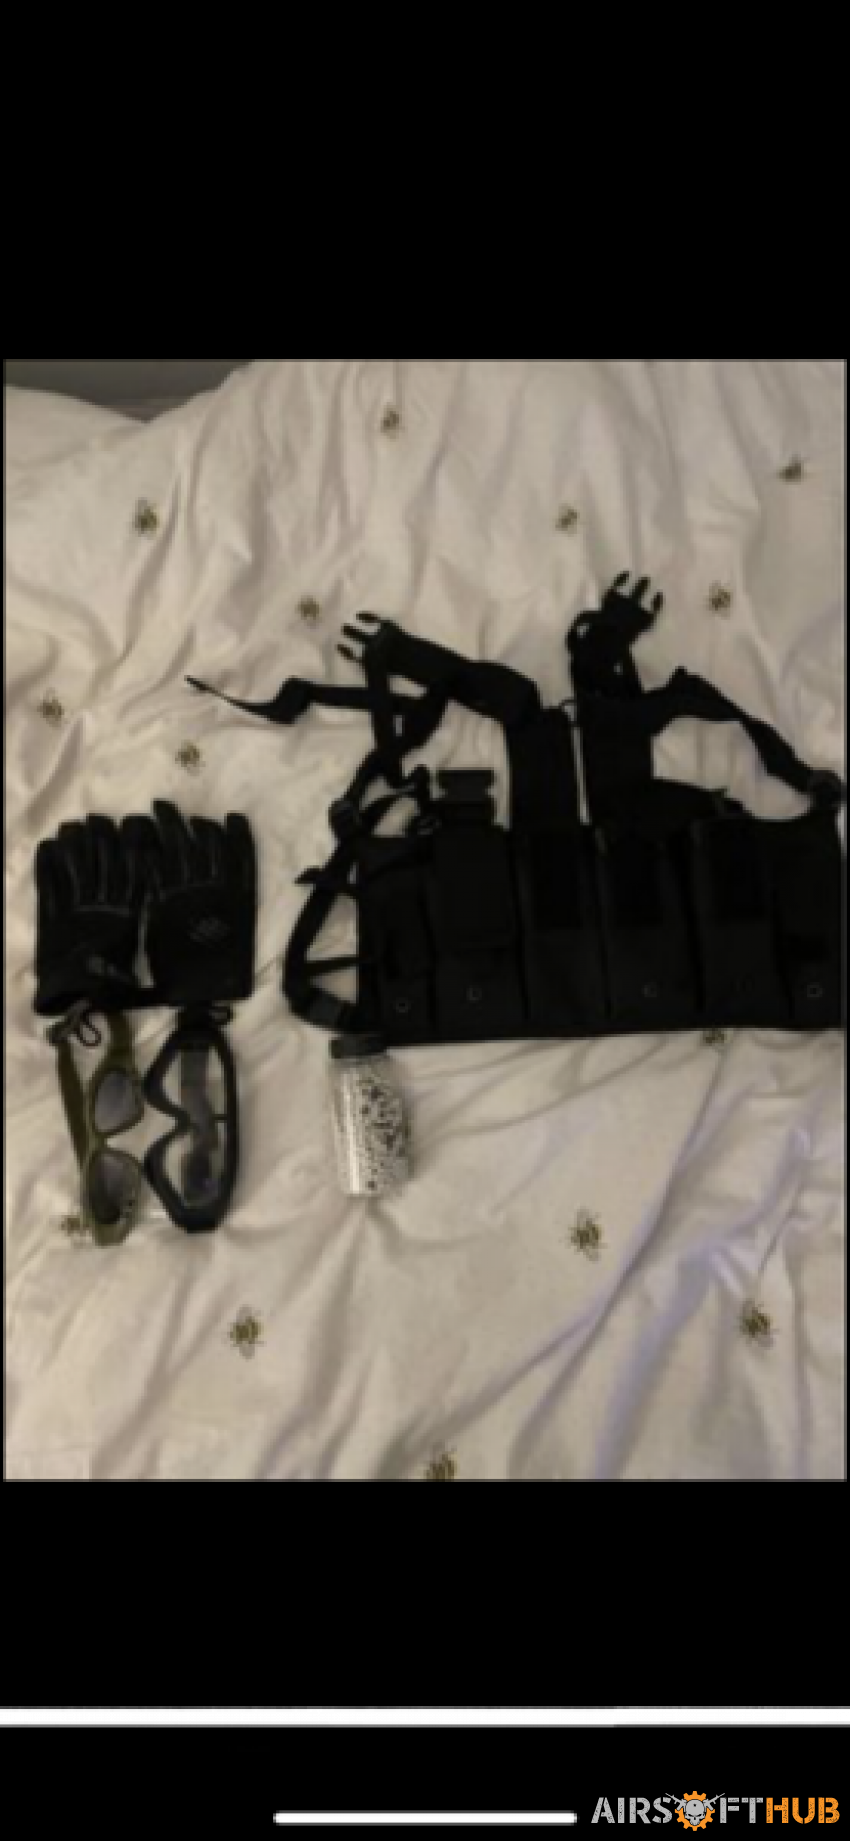 Safety equipment - Used airsoft equipment